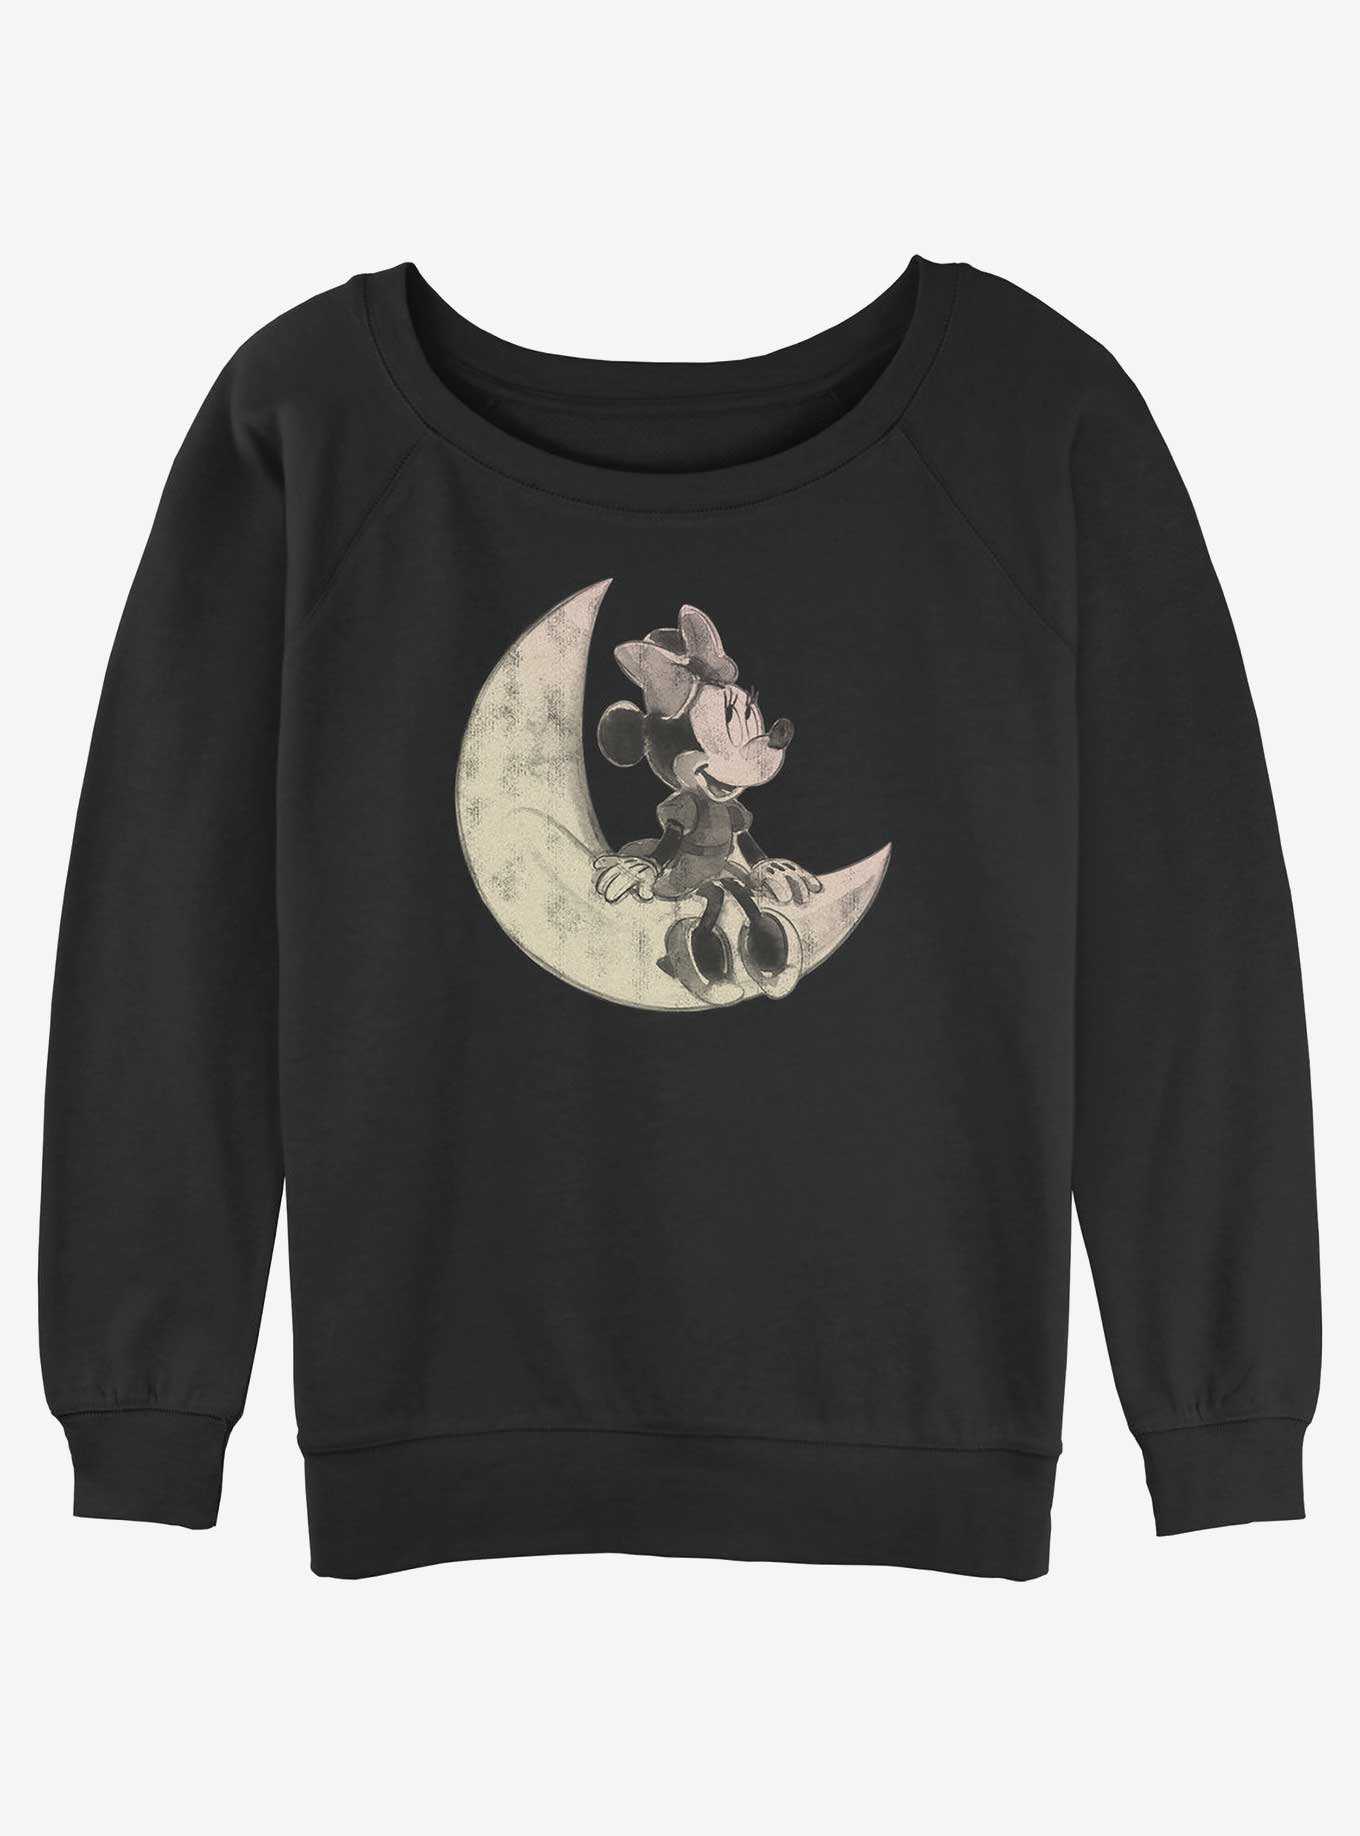 Disney Minnie Mouse On The Moon Womens Slouchy Sweatshirt, , hi-res